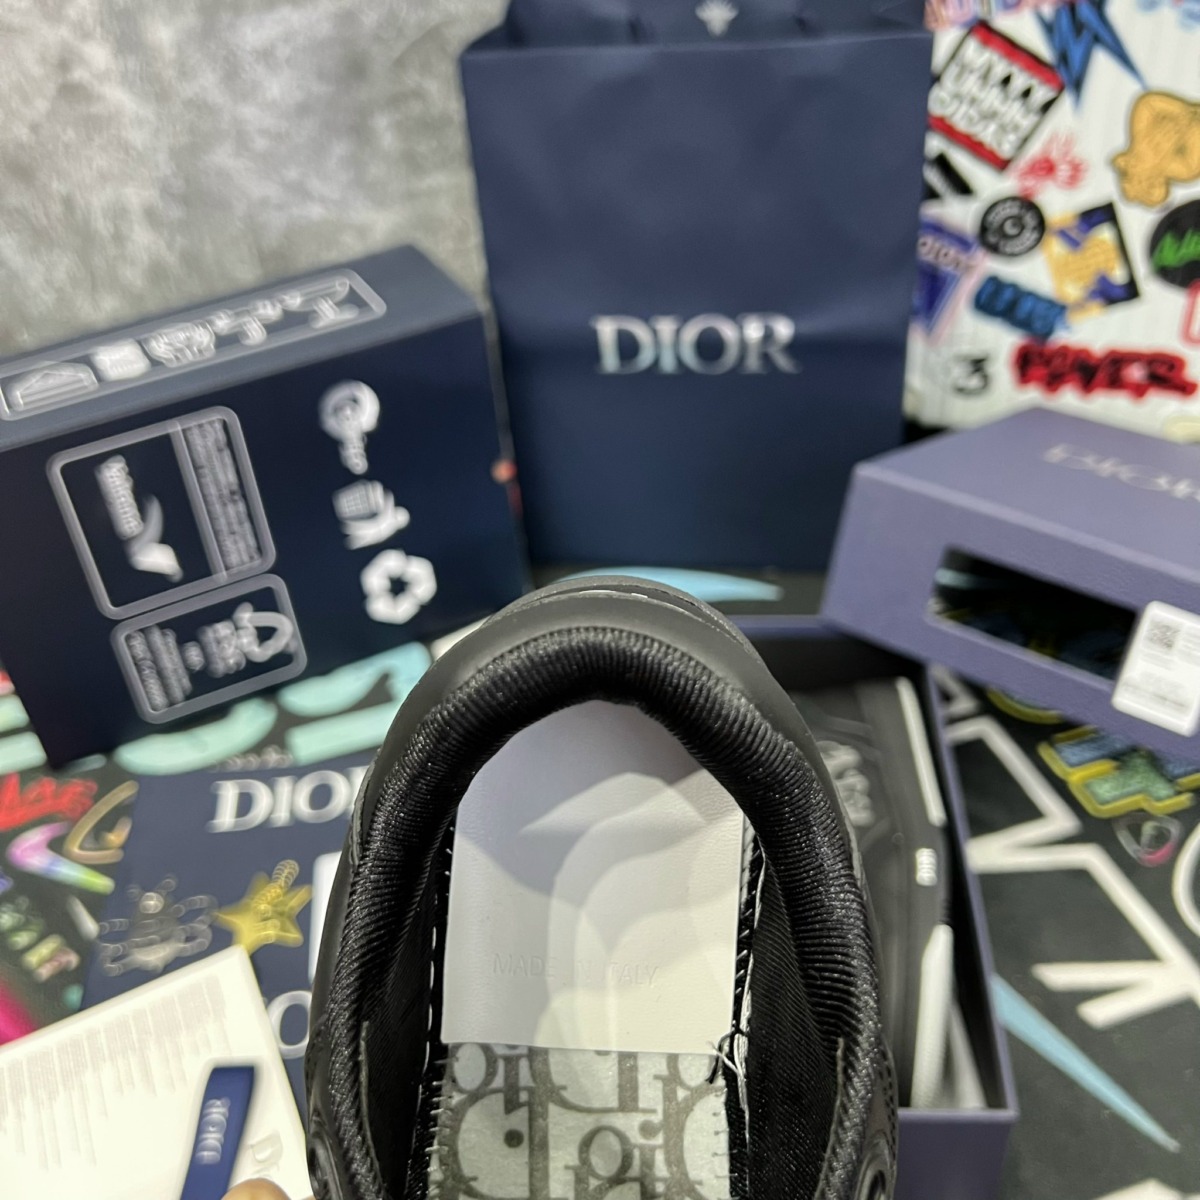 Dior B27 Low Black Oblique Galaxy Leather With Smooth Calfskin And Suede like auth 99.99%